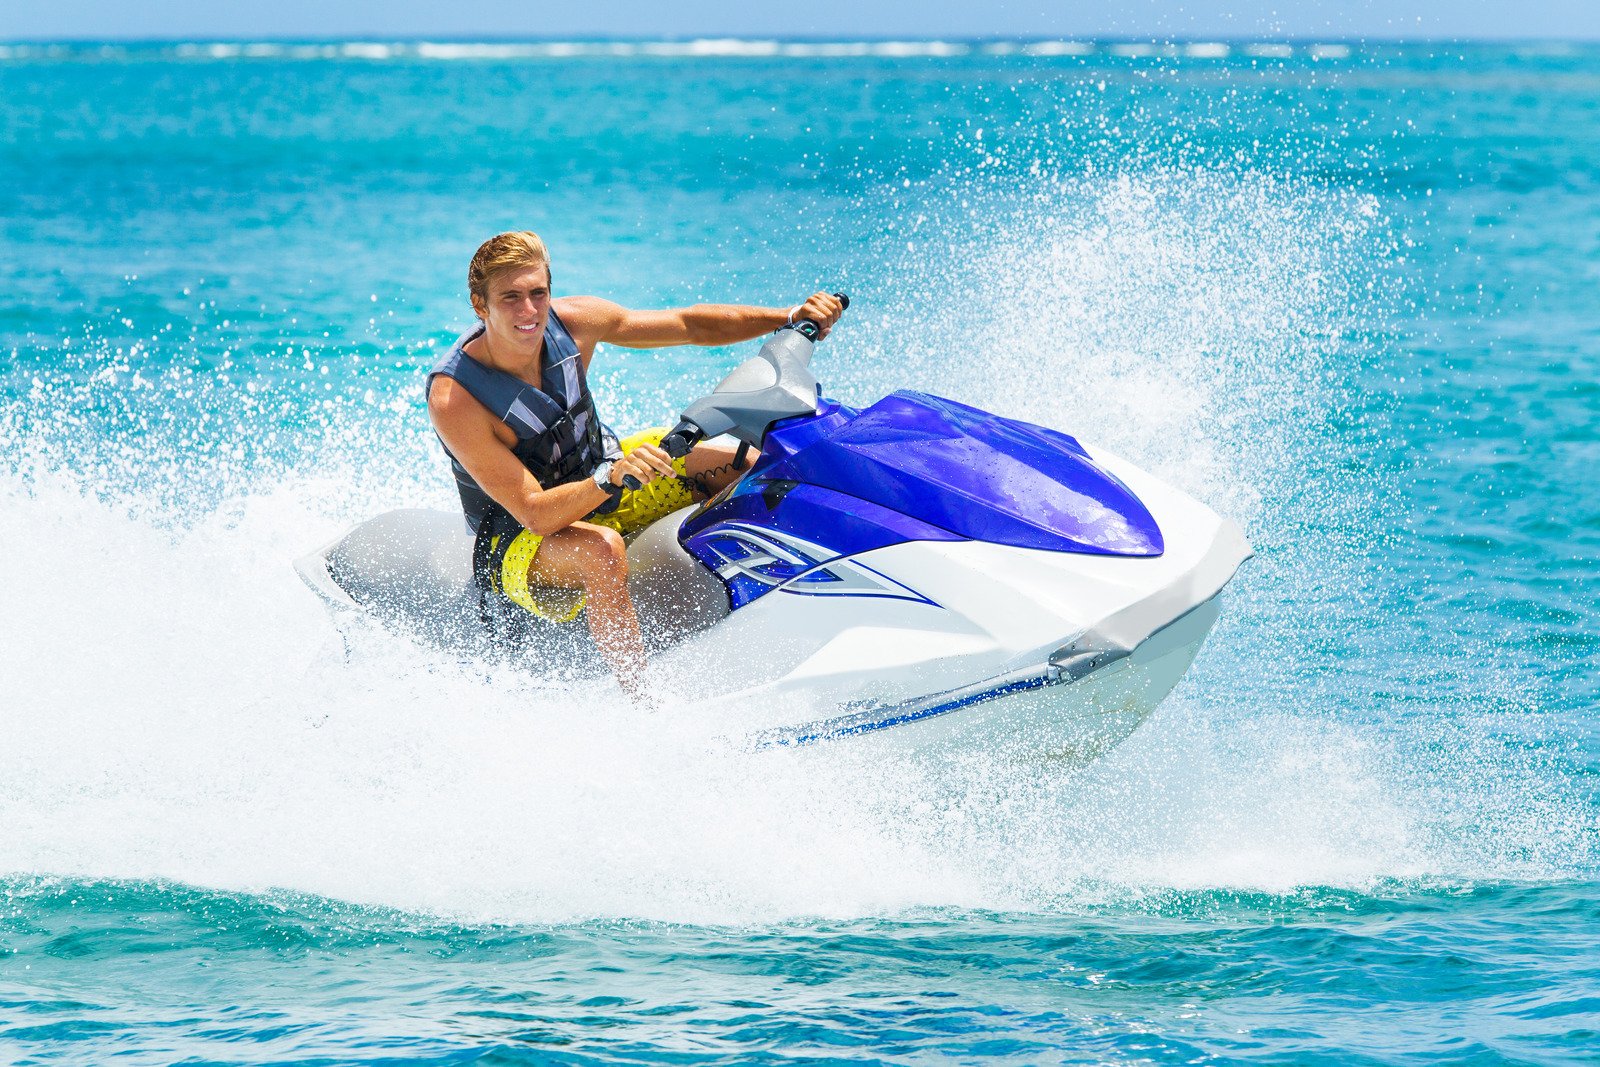 Jet Skiing Techniques and Skills
